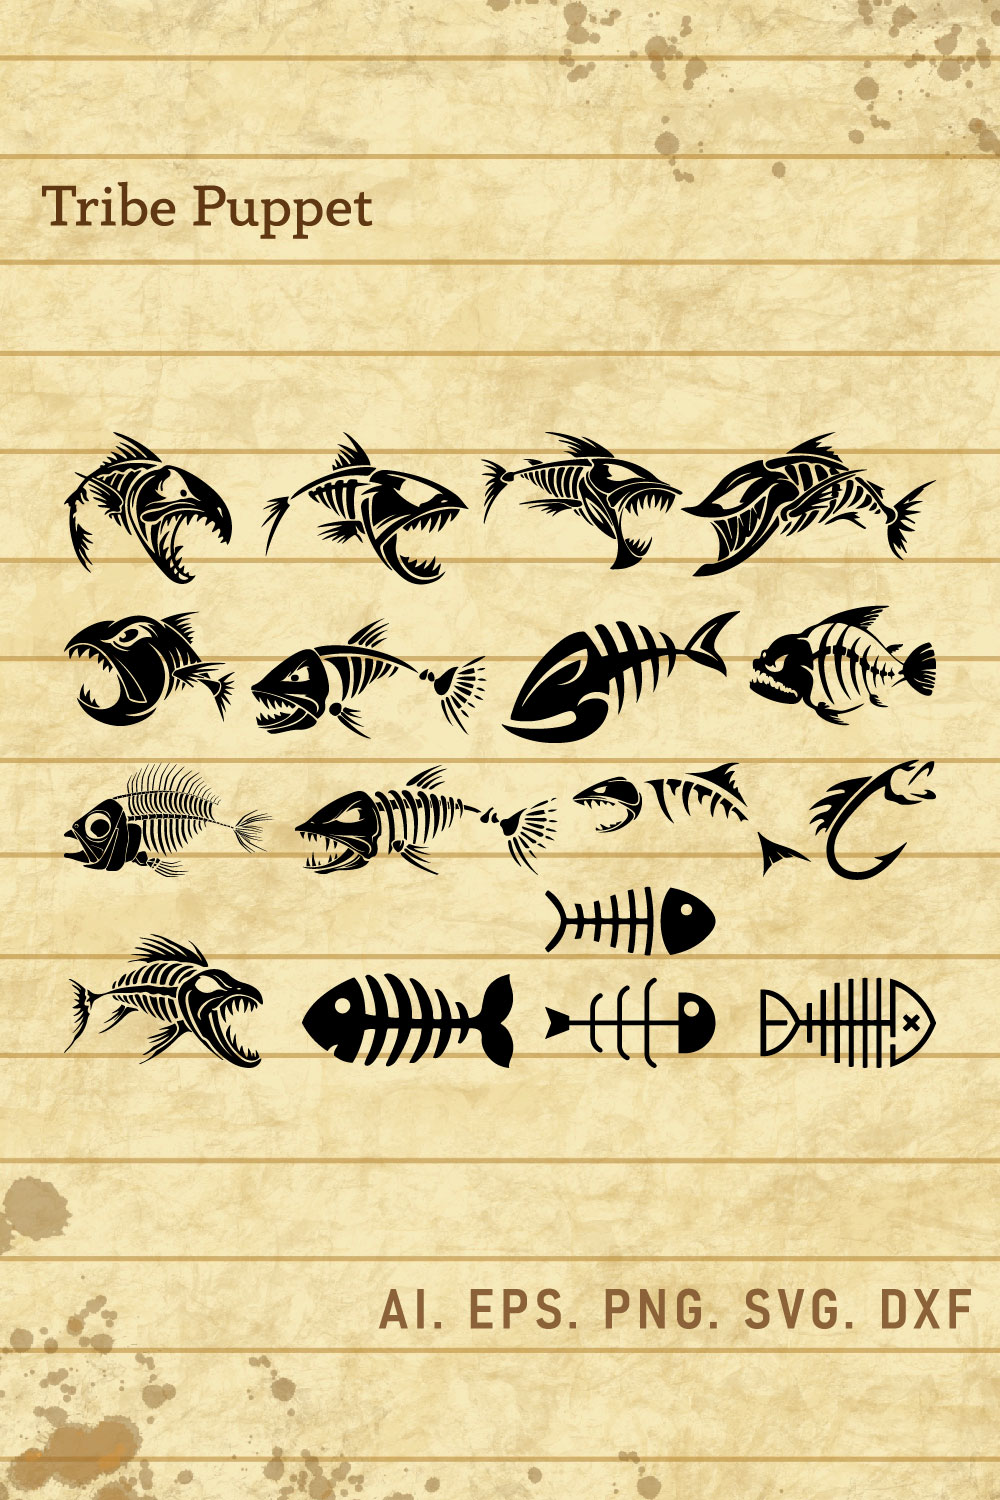 Bunch of fish that are on a piece of paper.